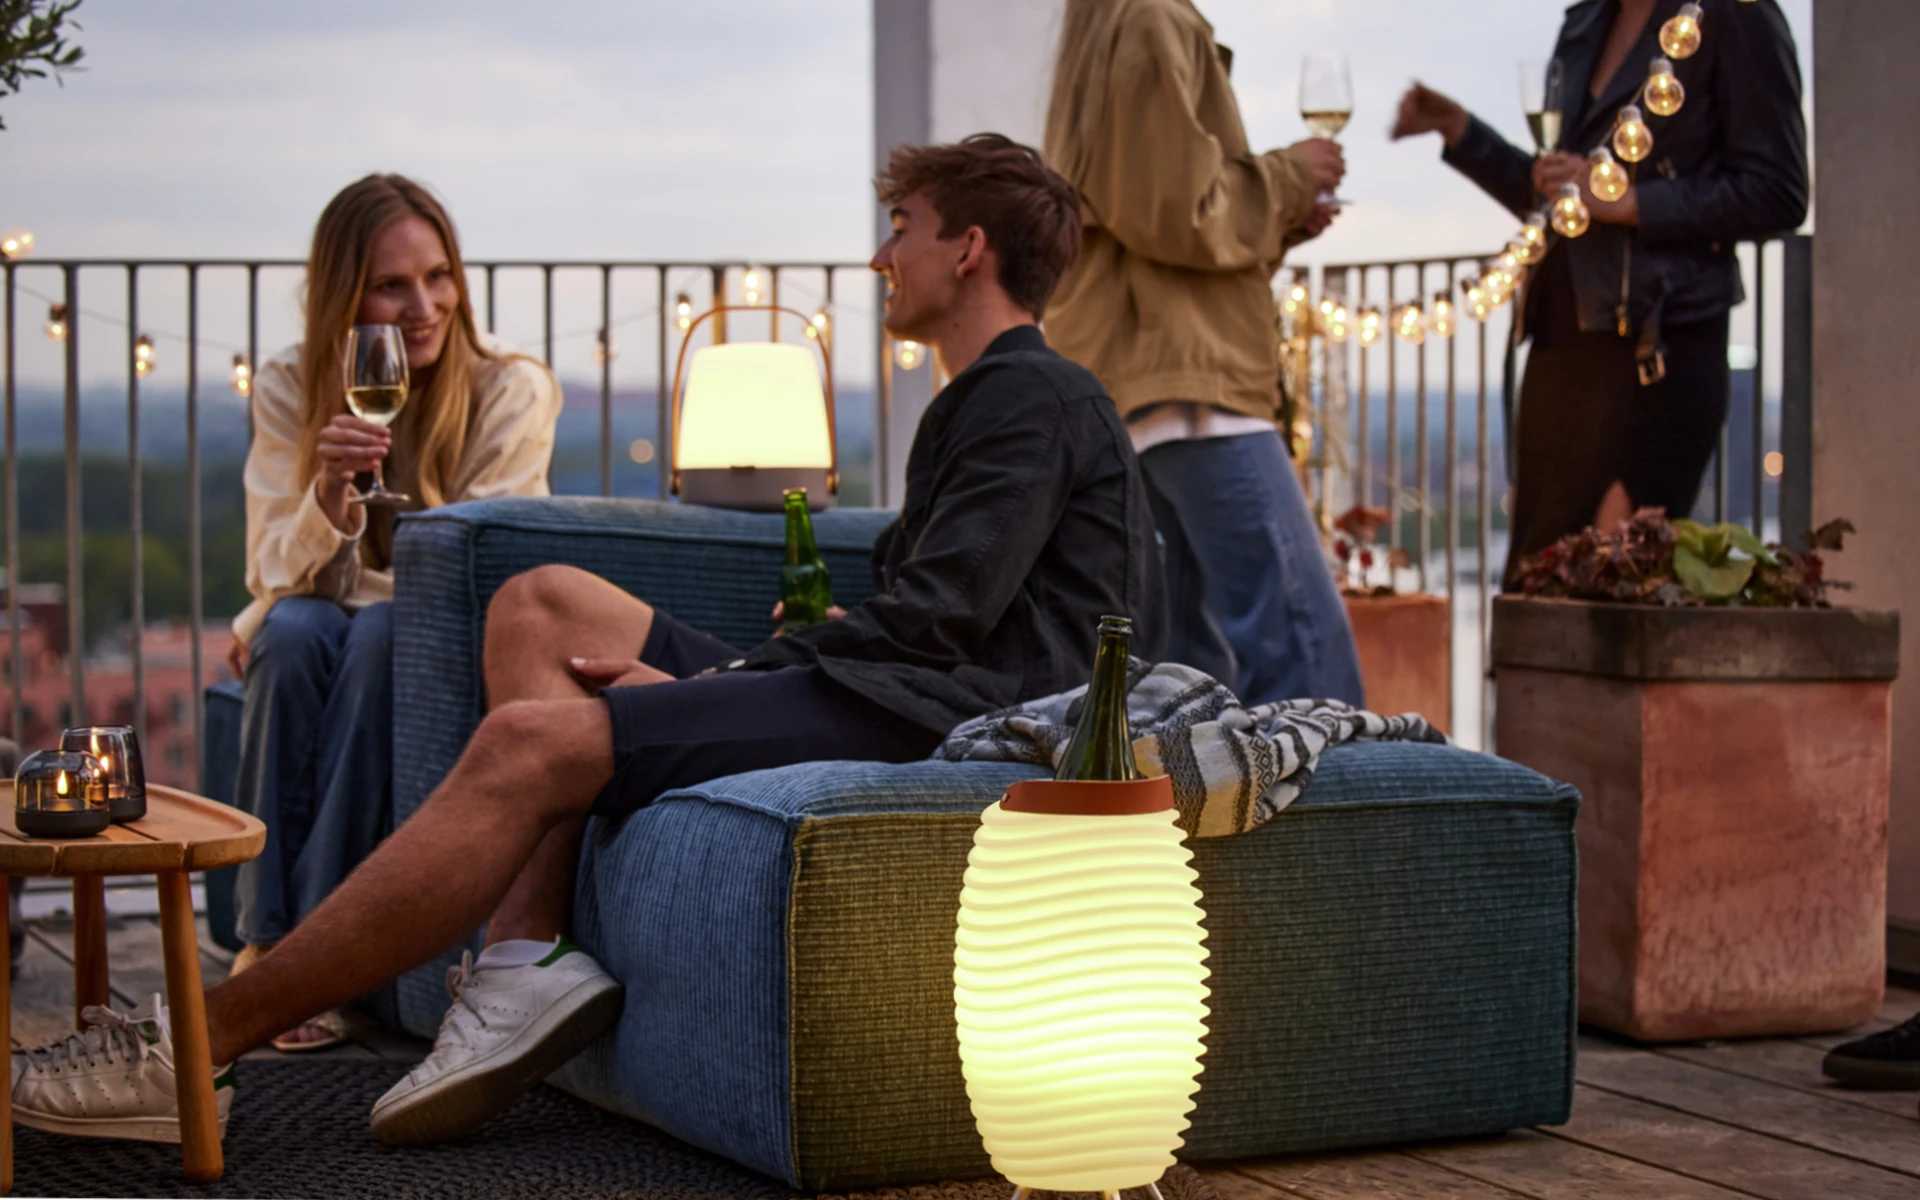 Kooduu Synergy | Bluetooth Speaker, Wine Cooler and dimmable LED lamp in 1  –